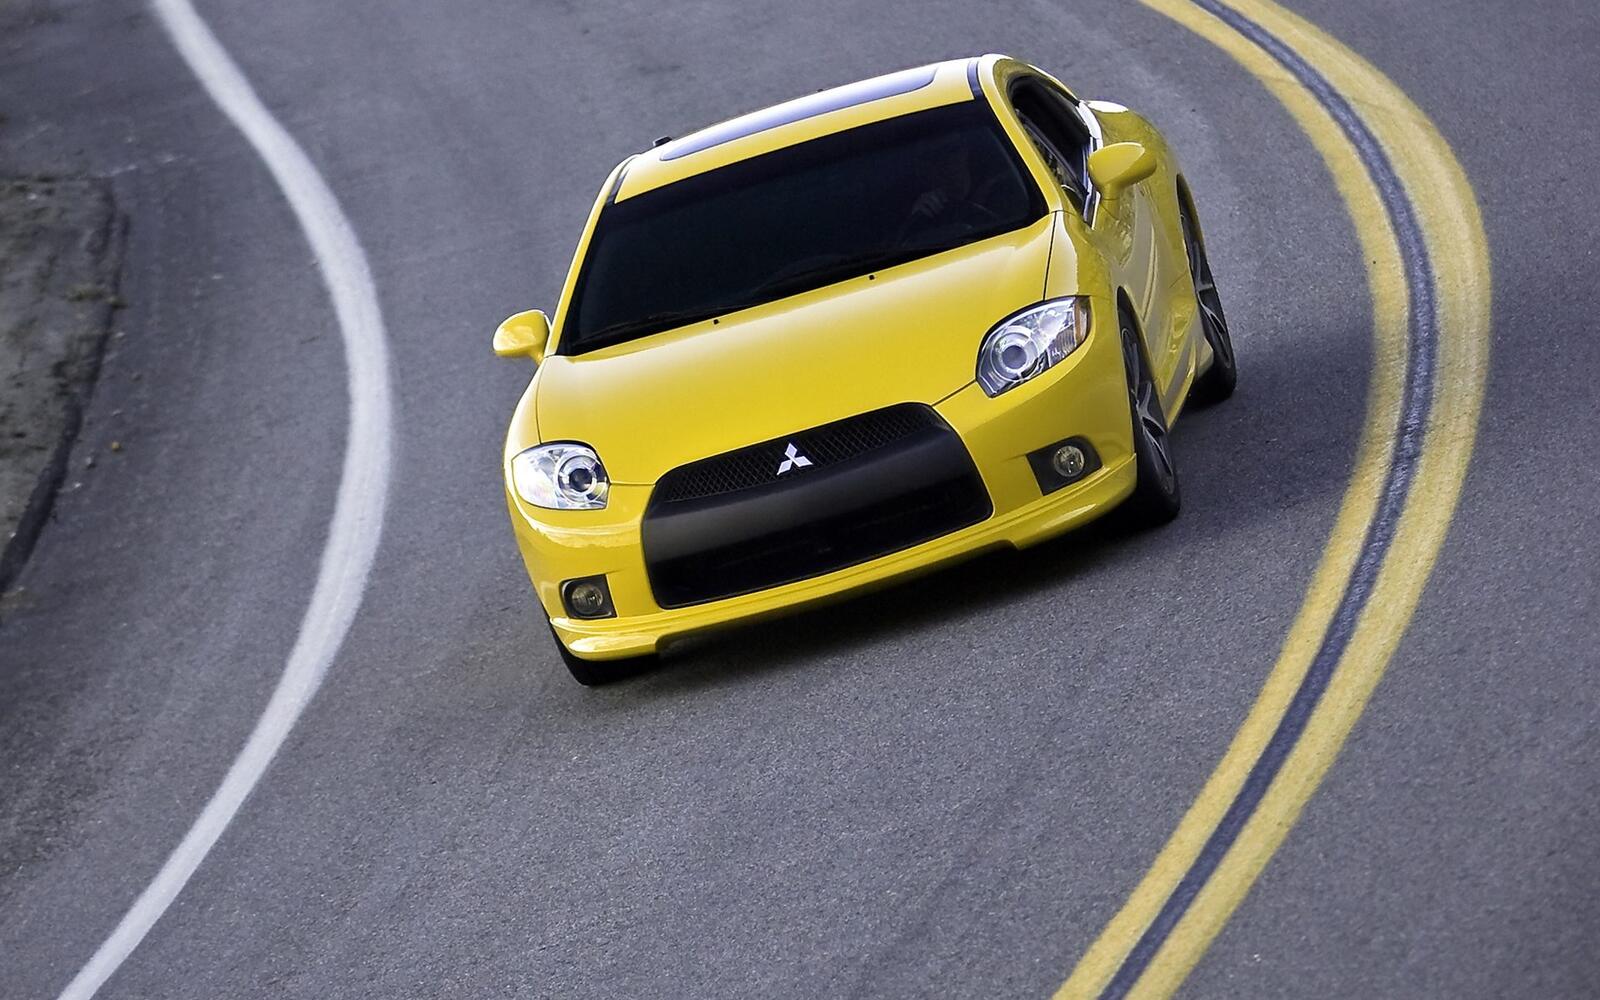 Wallpapers car yellow race on the desktop